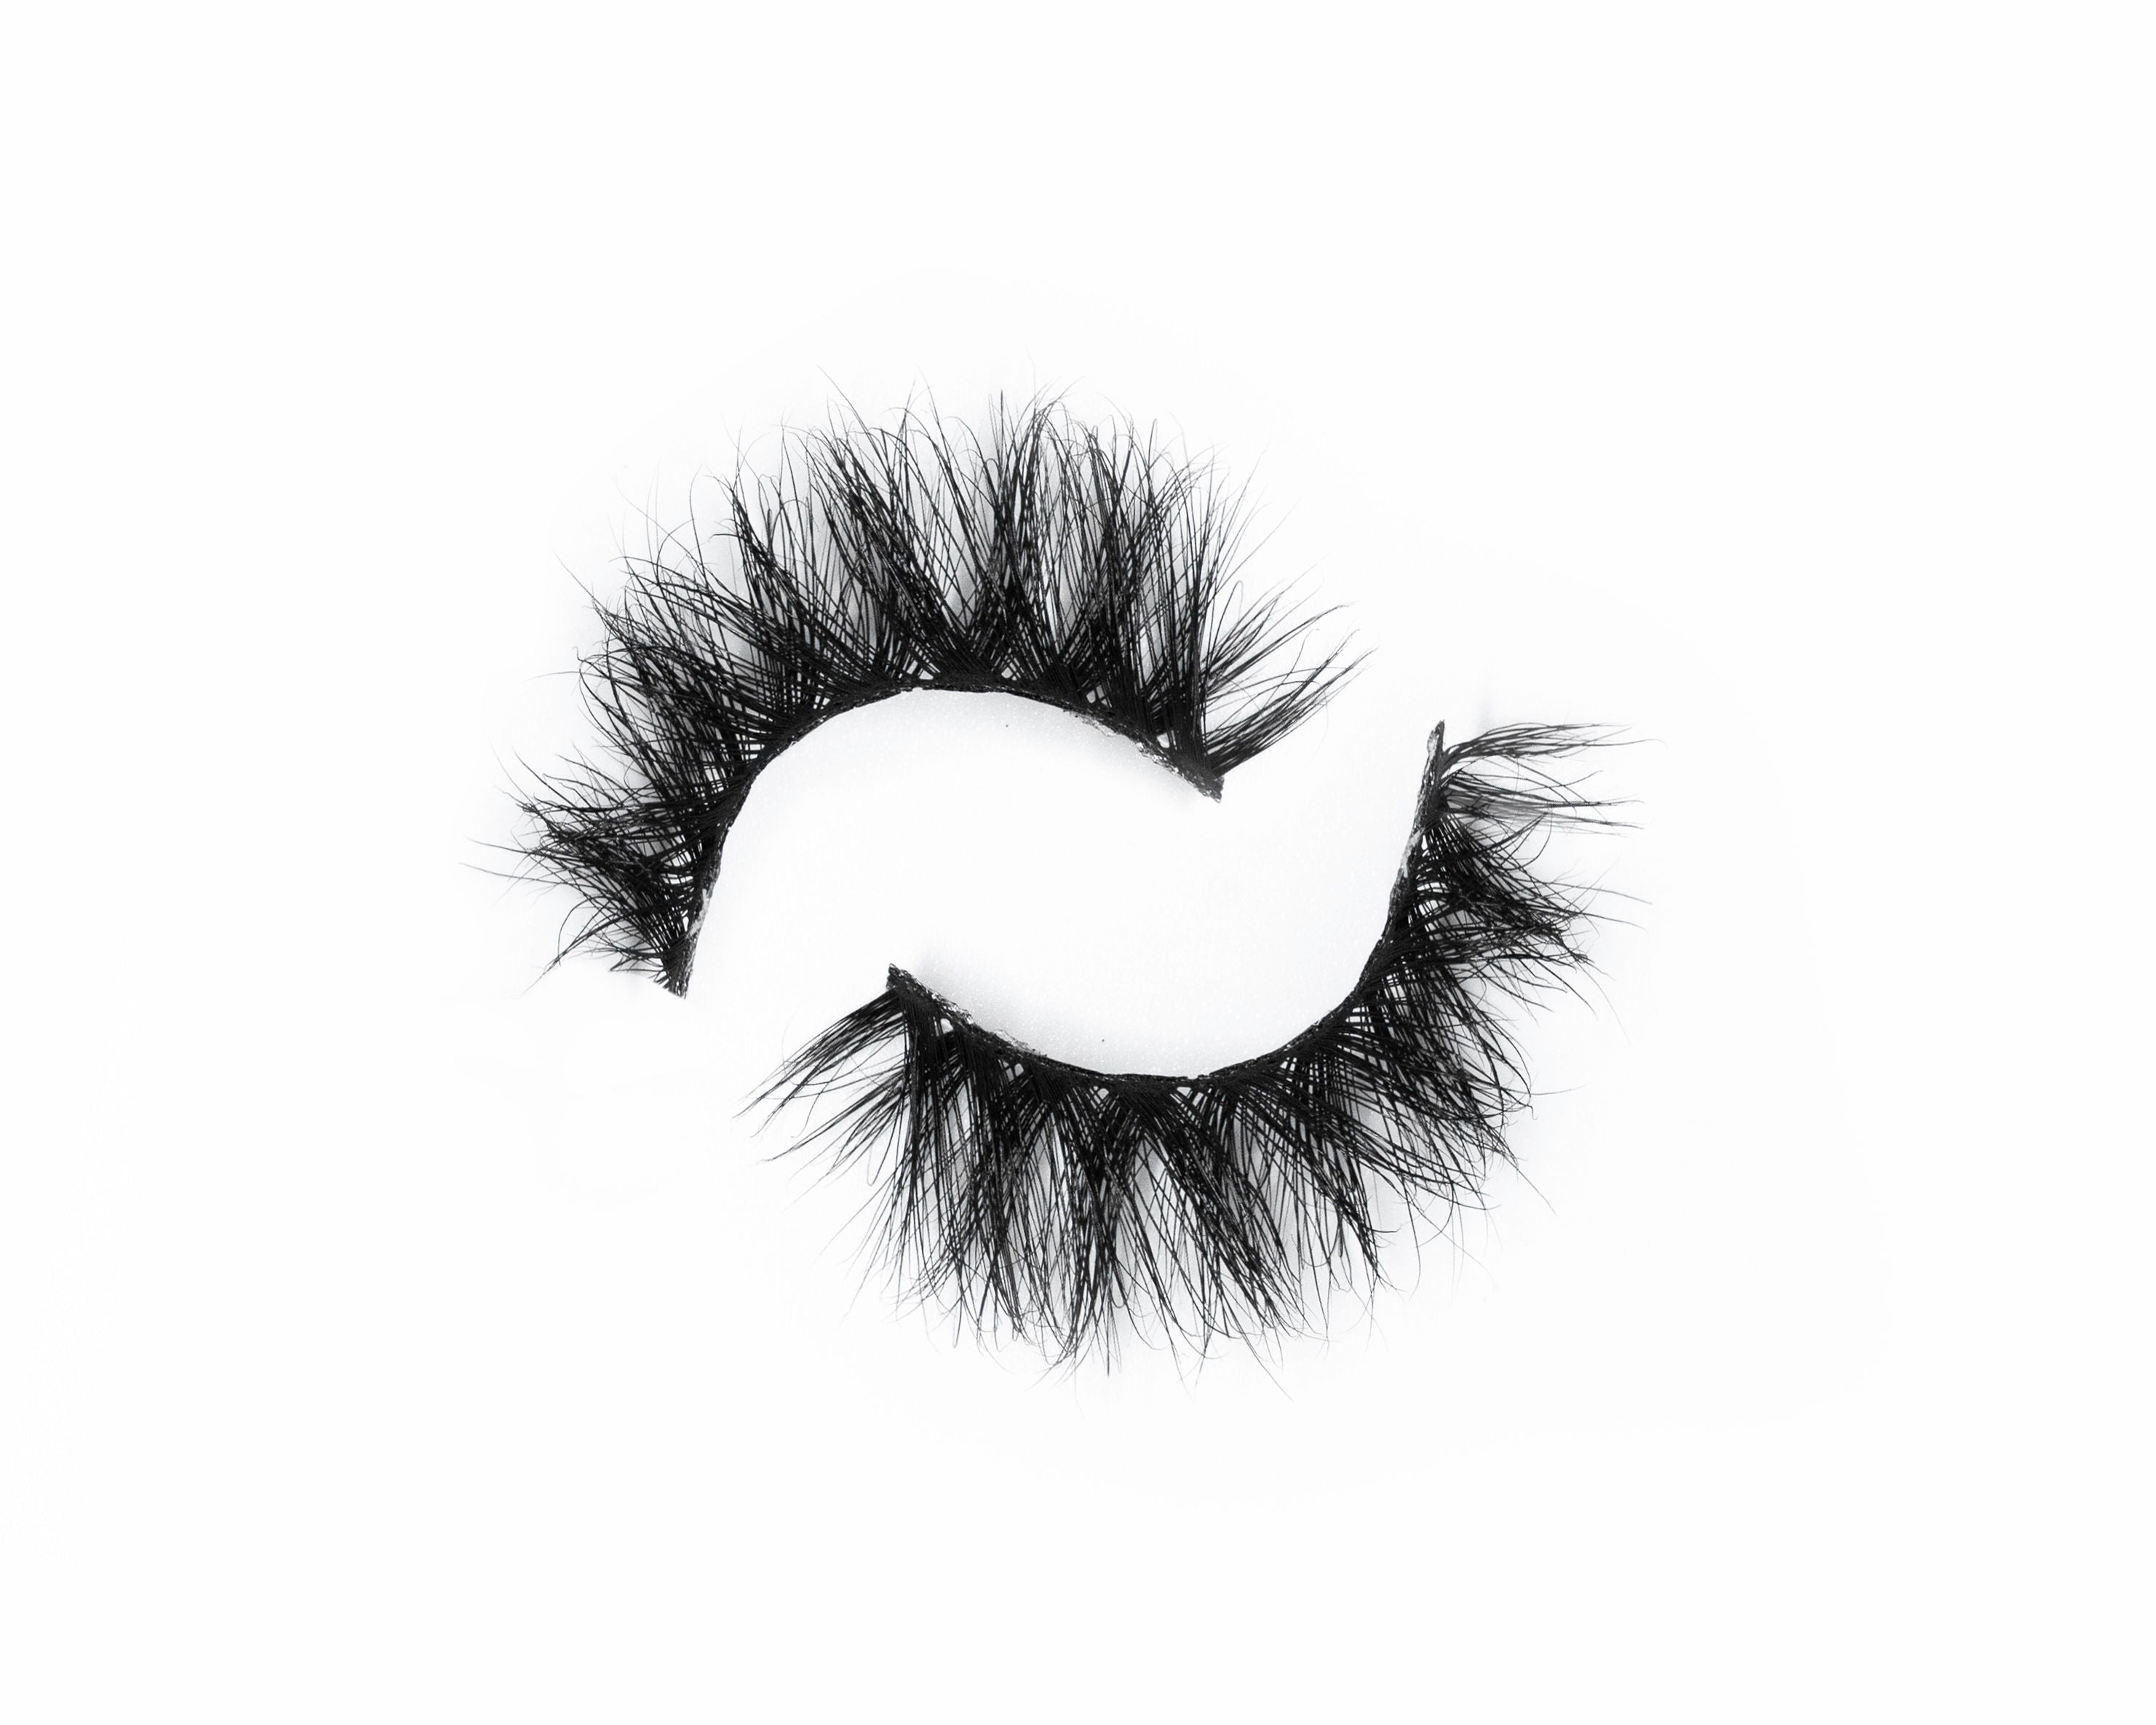 3D MINK LASHES 3D MINK EYELASHES 3D MINK HAIR LASHES 3D MINK EYELASH EXTENSIONS. We are offering cheap 3d mink lashes and free delivery on all orders 40$ up domestically and 60$ internationally. Our mink lashes are cruelty-free.